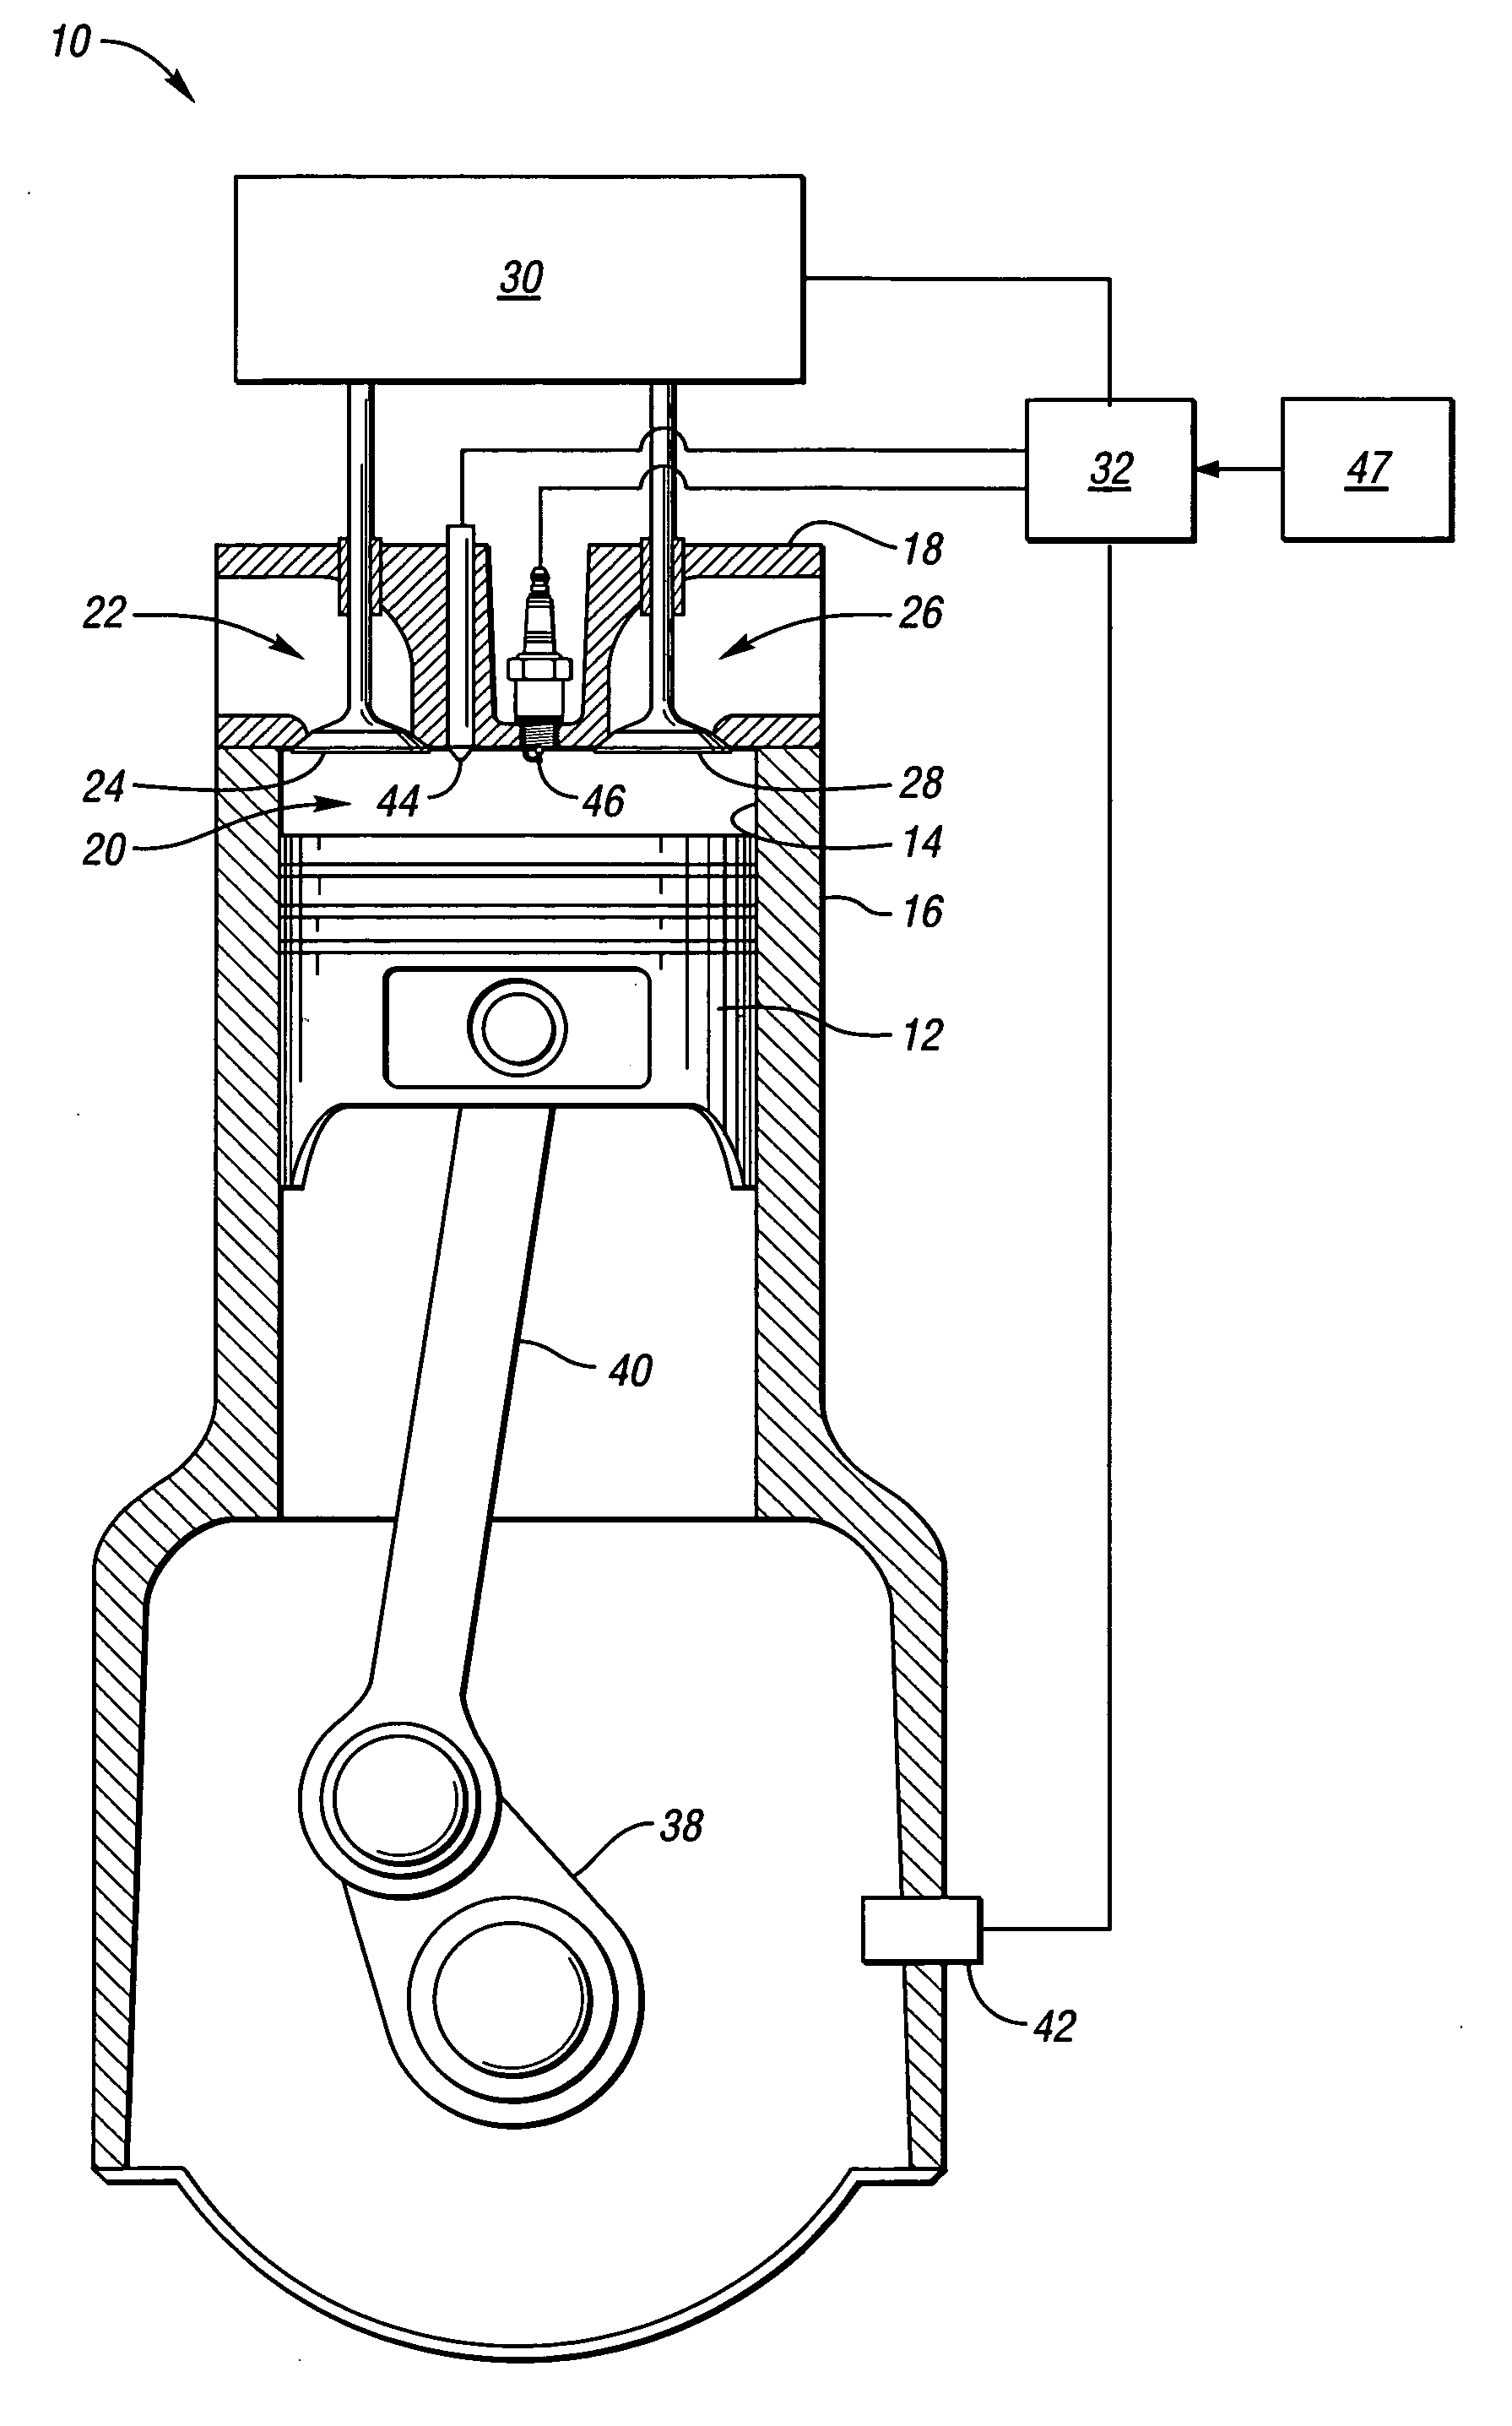 Method of HCCI and SI combustion control for a direct injection internal combustion engine